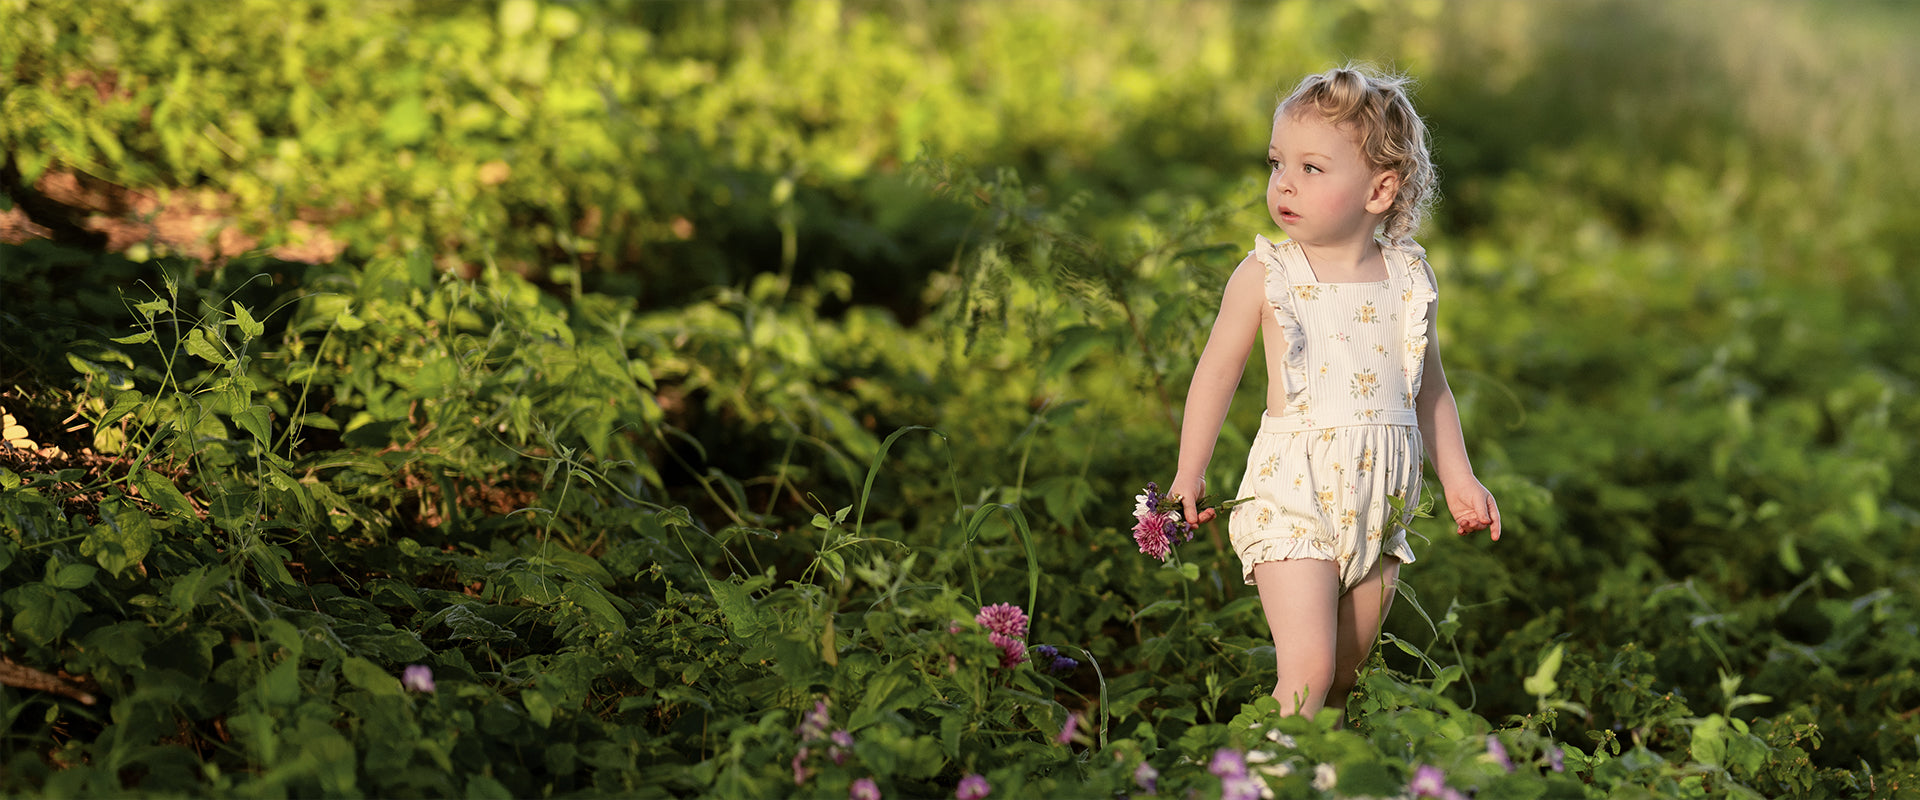 A little girl wearing a floral romper is standing in a field of flowers.